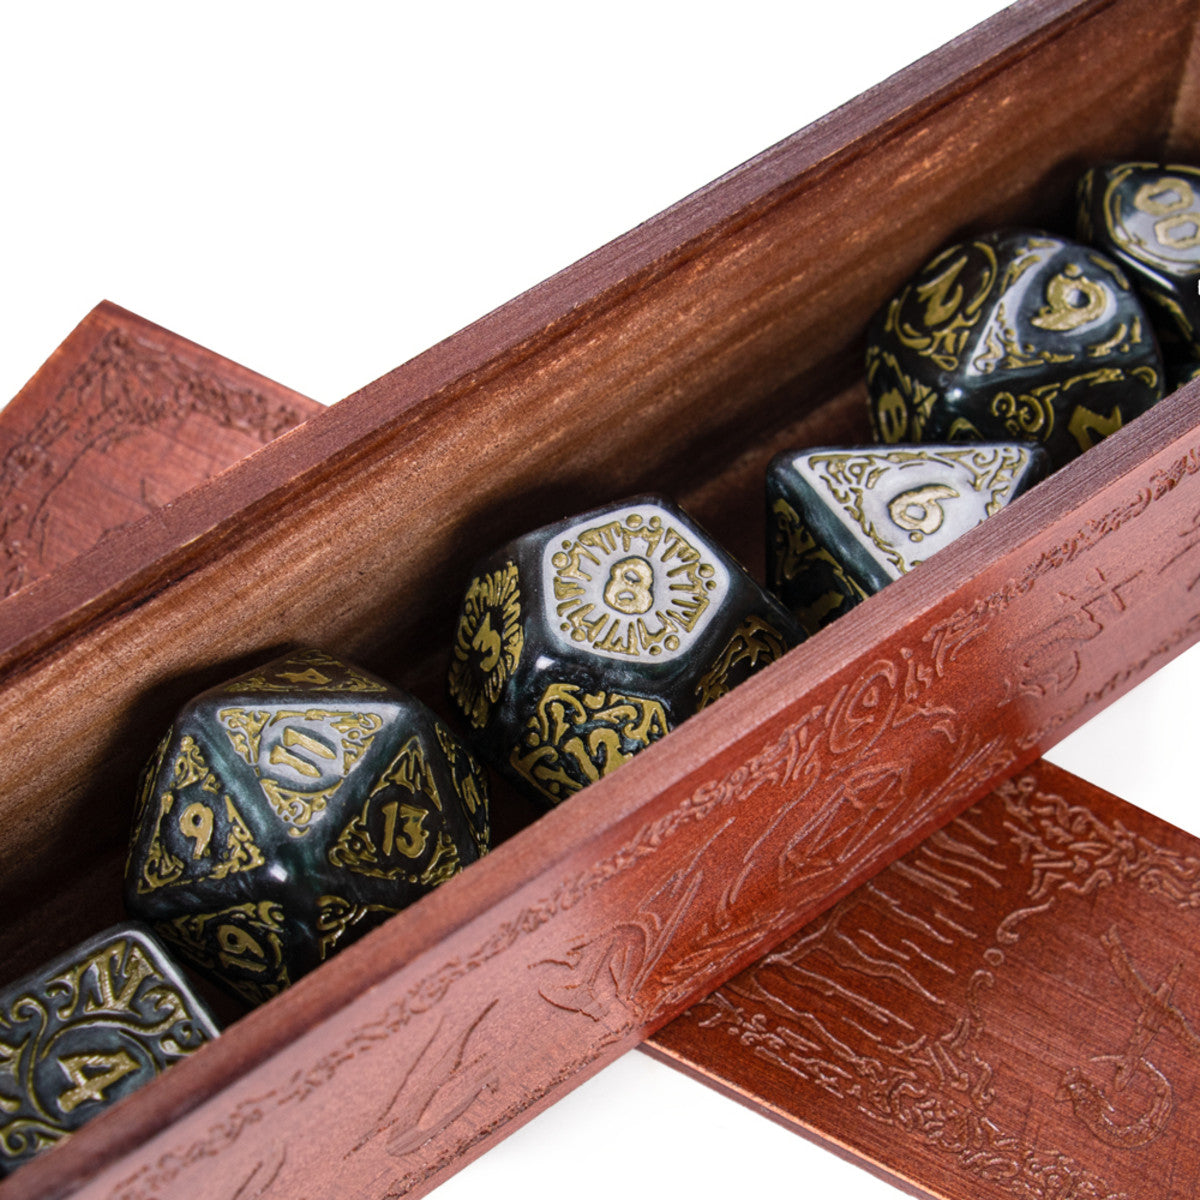 Titan Dice - Nyx Smoke With Gold 25mm Polyhedral Dice    